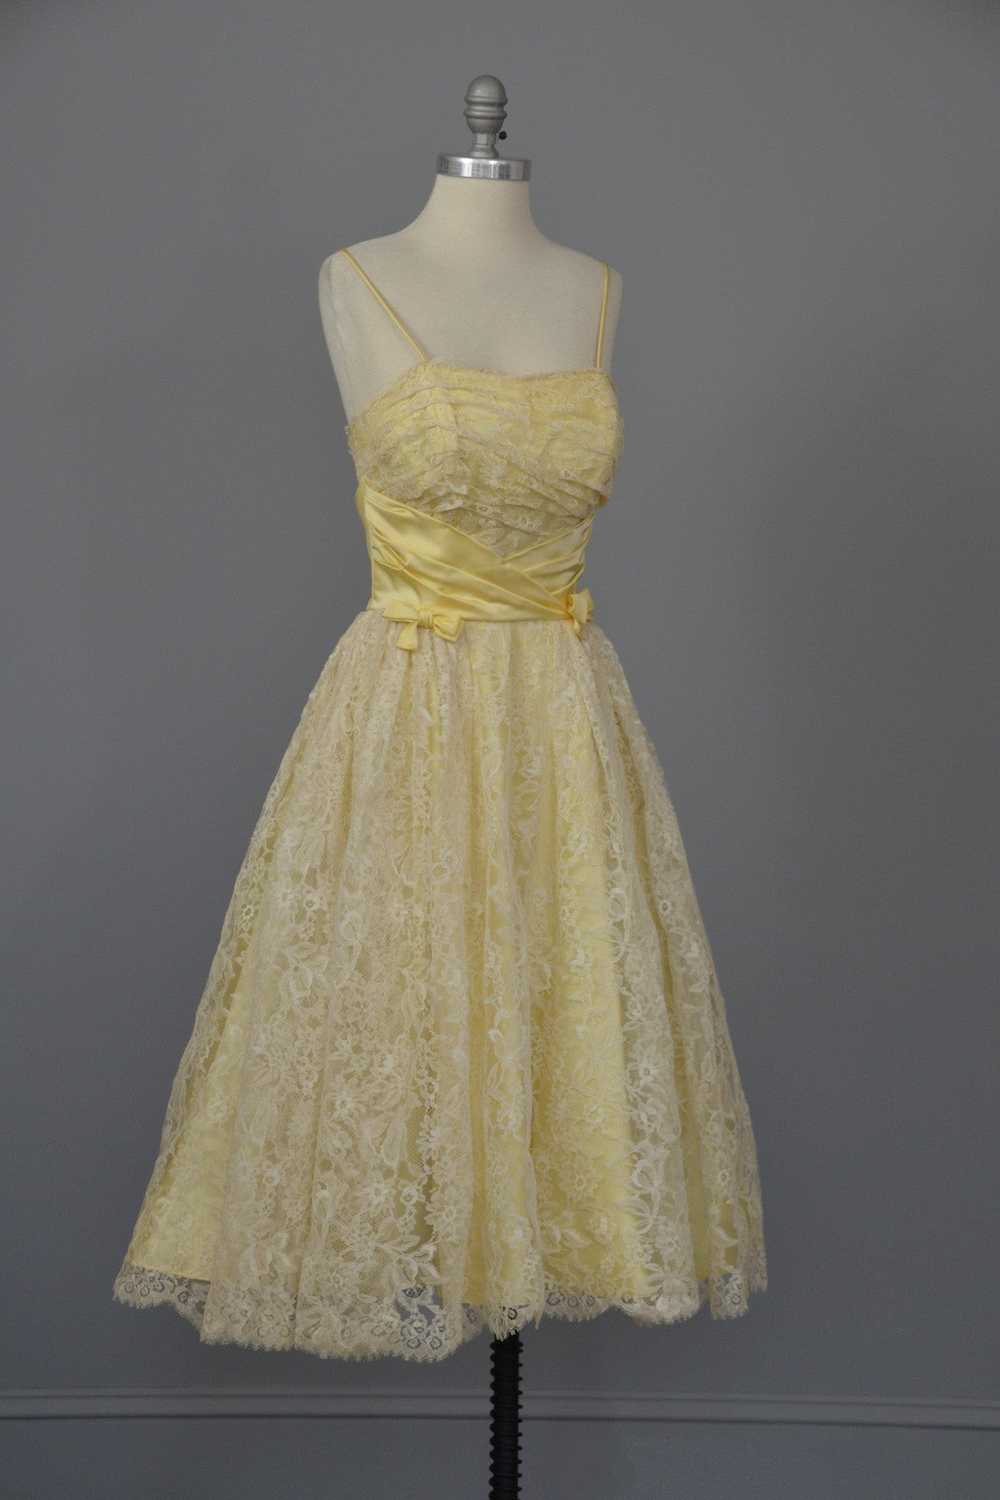 1950s White Lace Buttercup Party Prom Dress - image 5